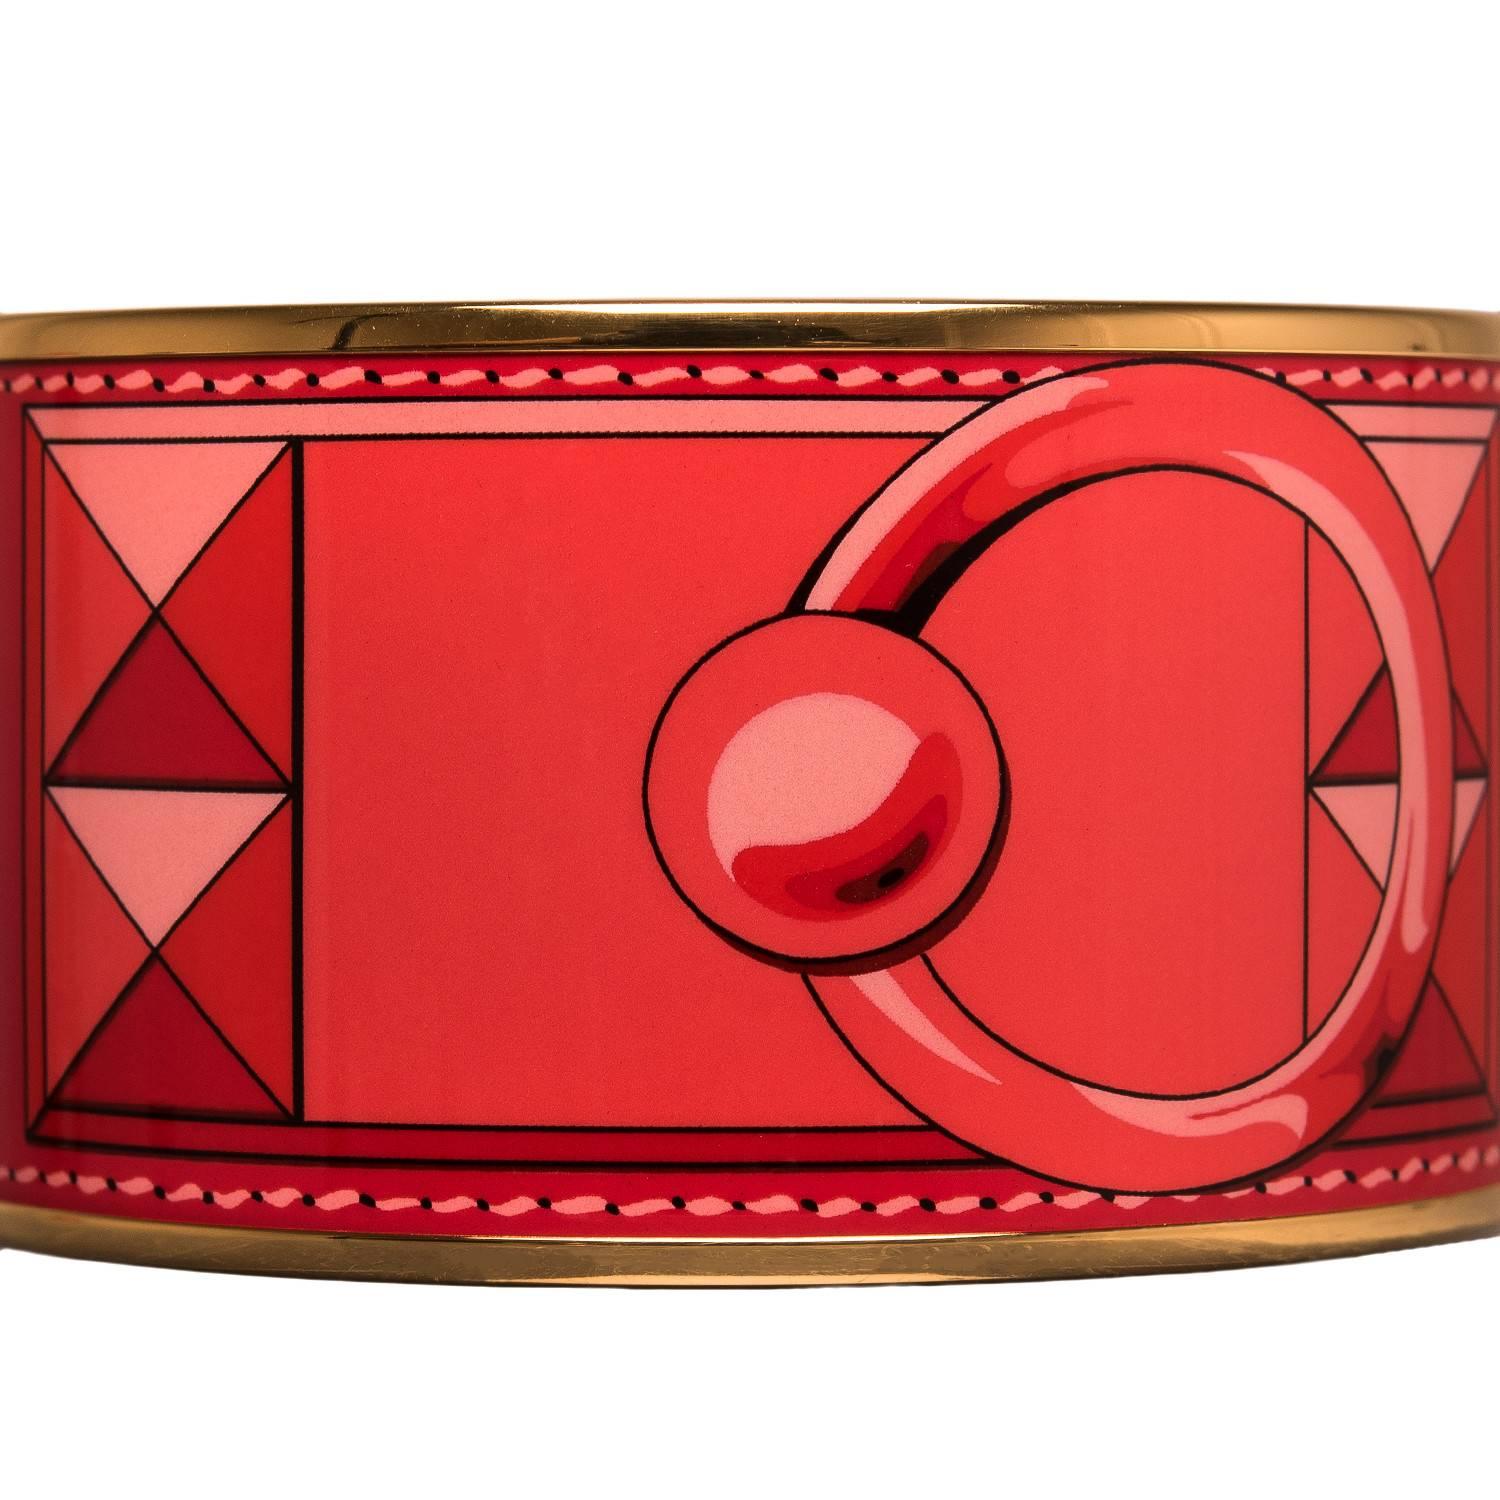 Hermes "Collier de Chiens" extra wide printed enamel bracelet size PM (65).

This bracelet depicts the Hermes Collier de Chien leather cuff on a red colored background with gold plated hardware.

Origin: France

Condition: Pristine,